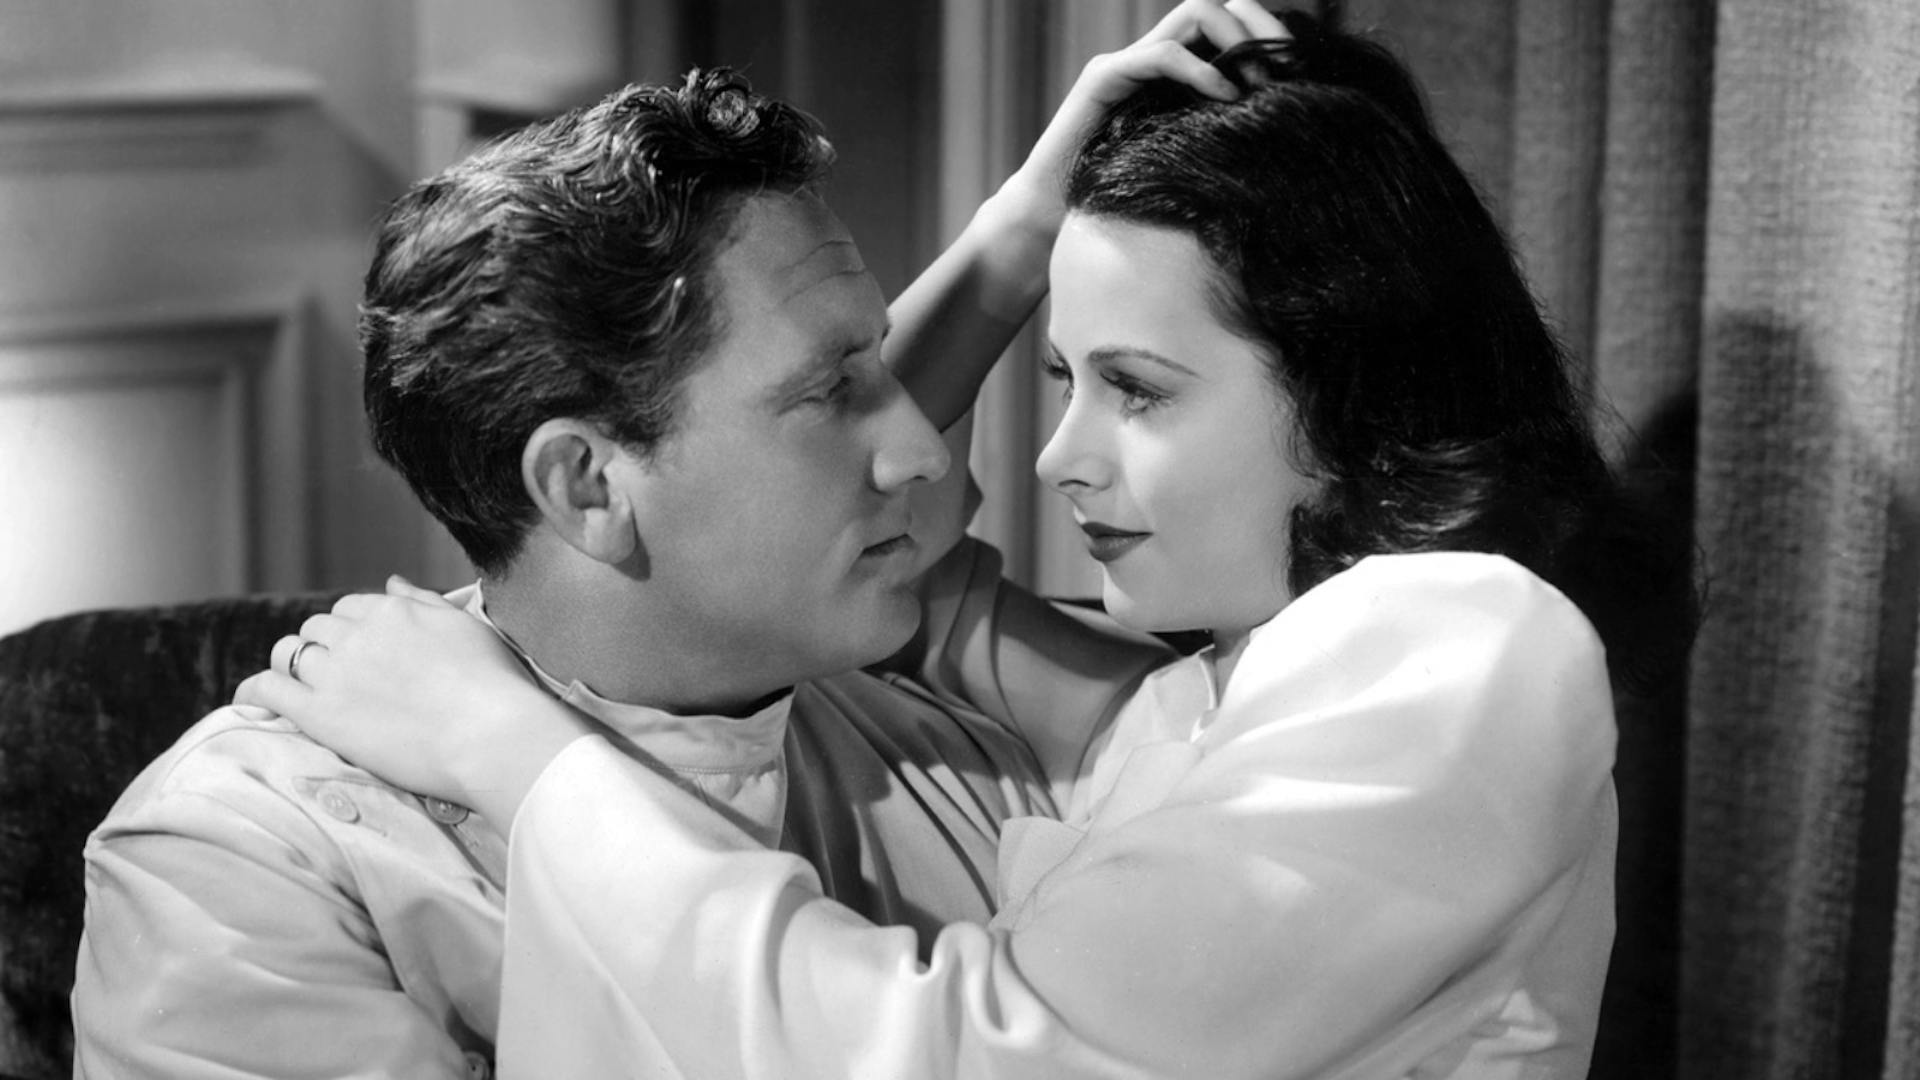 Bombshell: the Hedy Lamarr Story